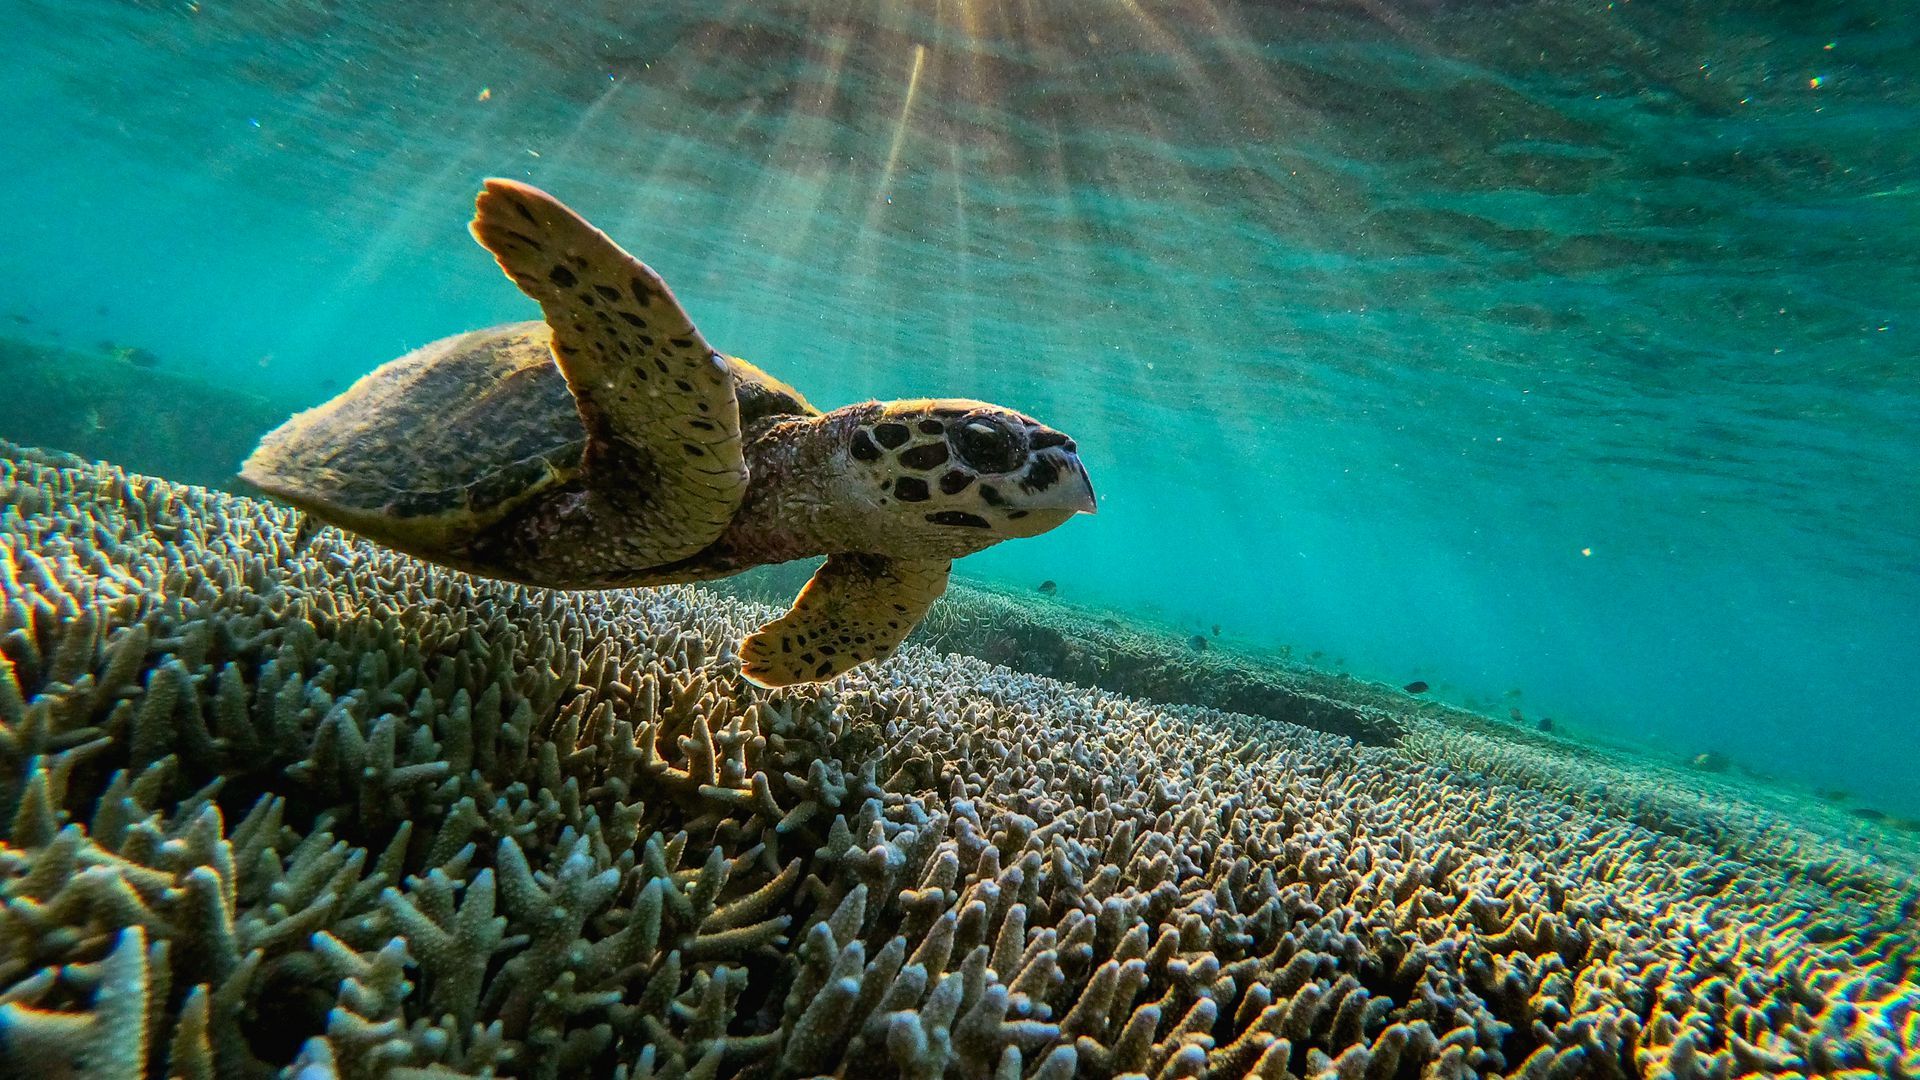 A green turtle swims among the corals of the Great Barrier Reef 